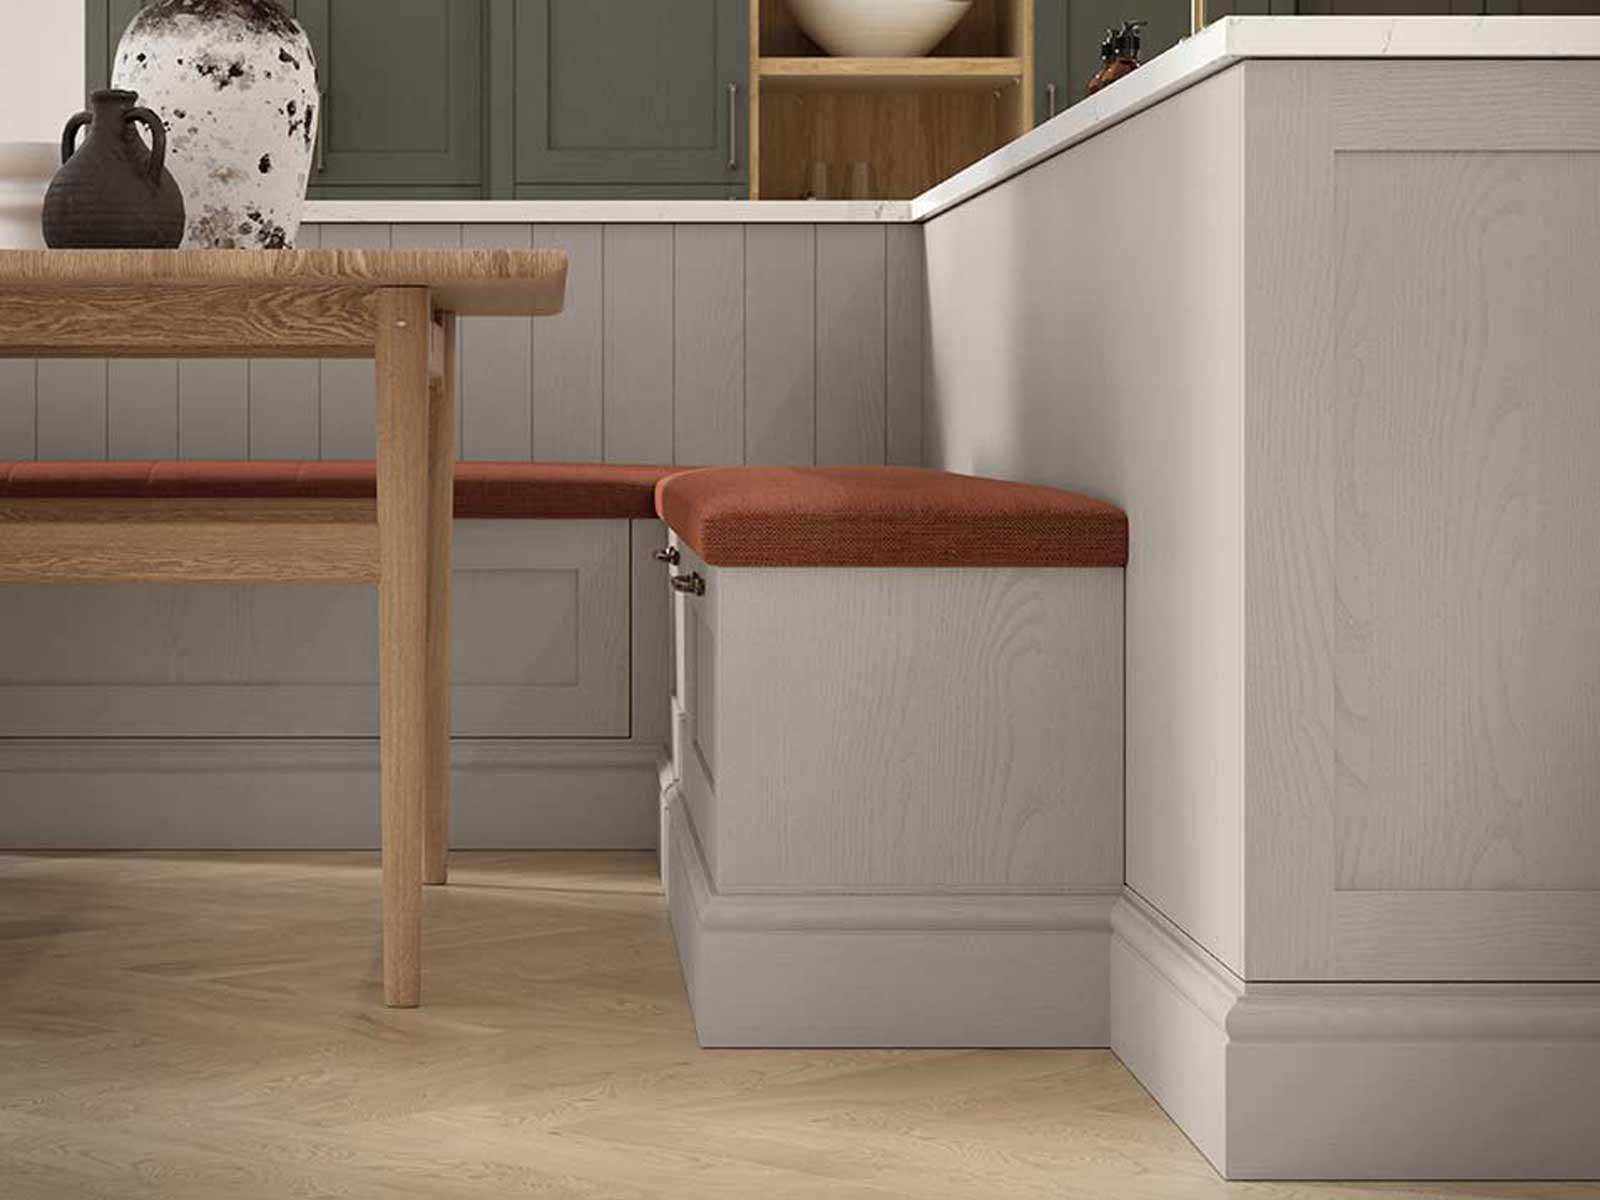 Hardwick kitchen benches with shaker style